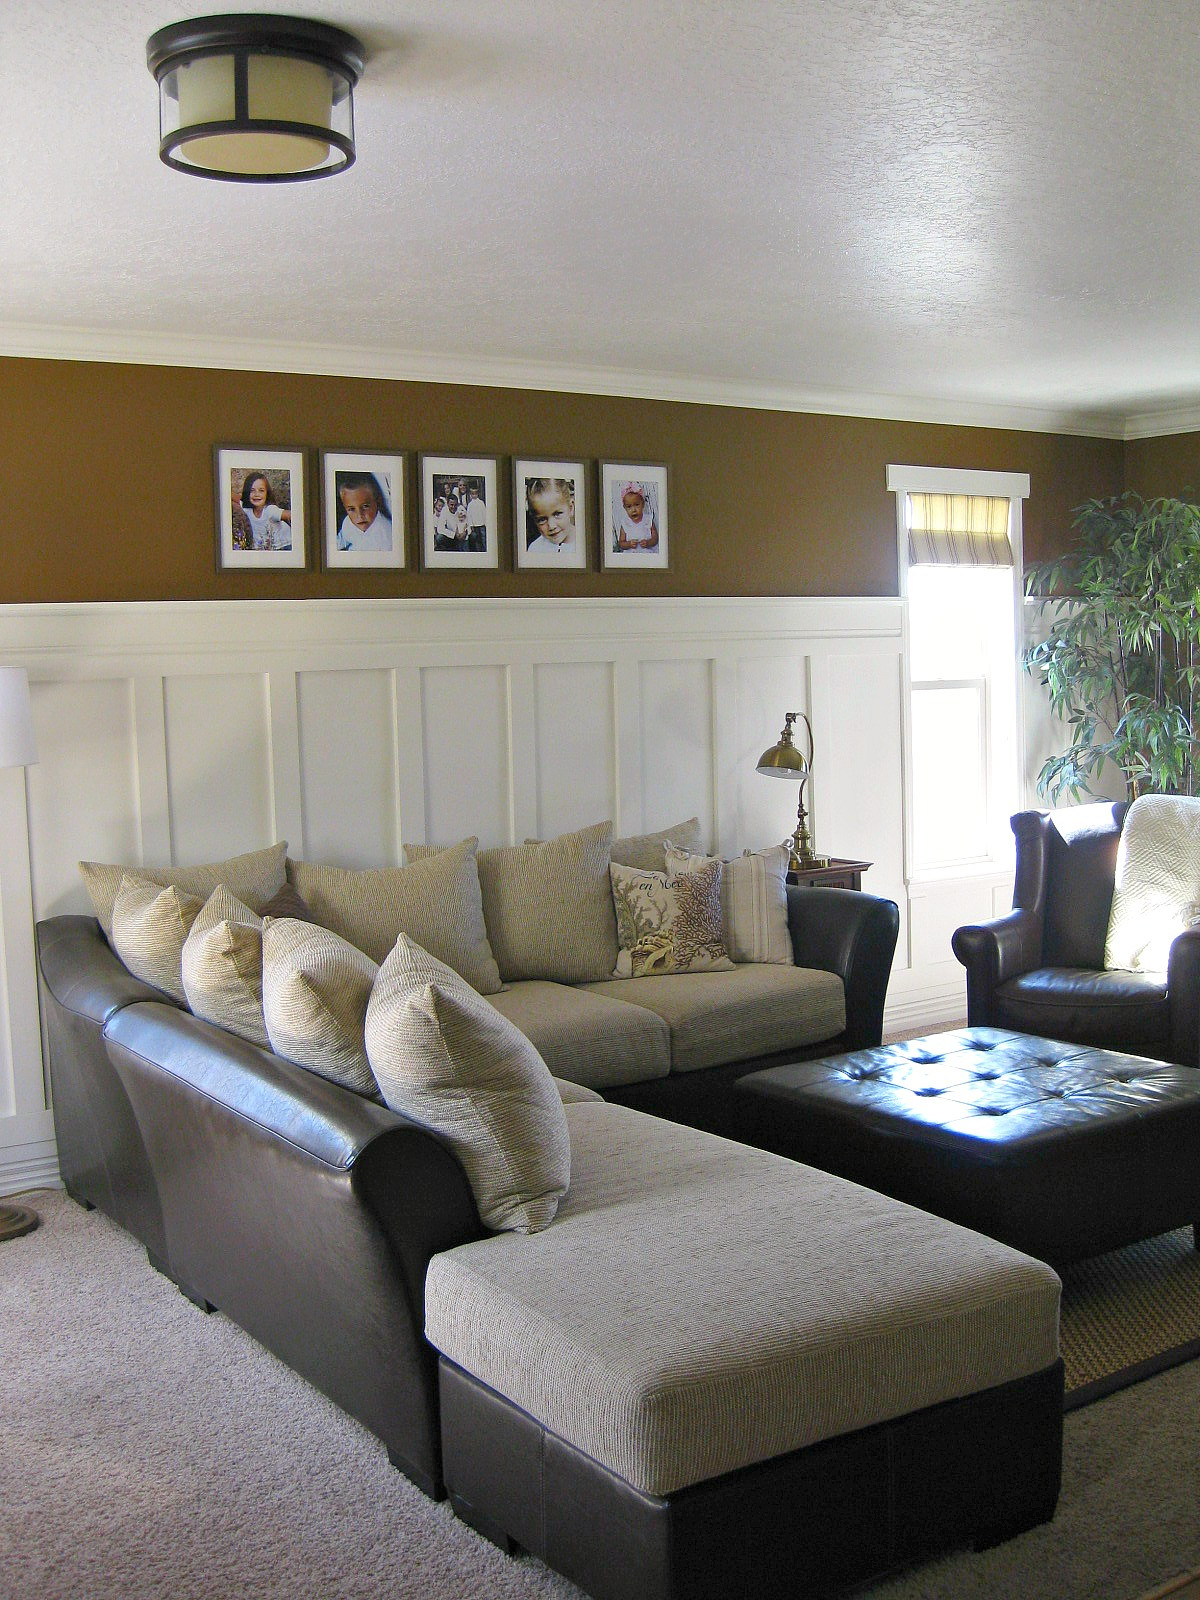 Living Room Wall
 TDA decorating and design Board & Batten Accent Wall Tutorial